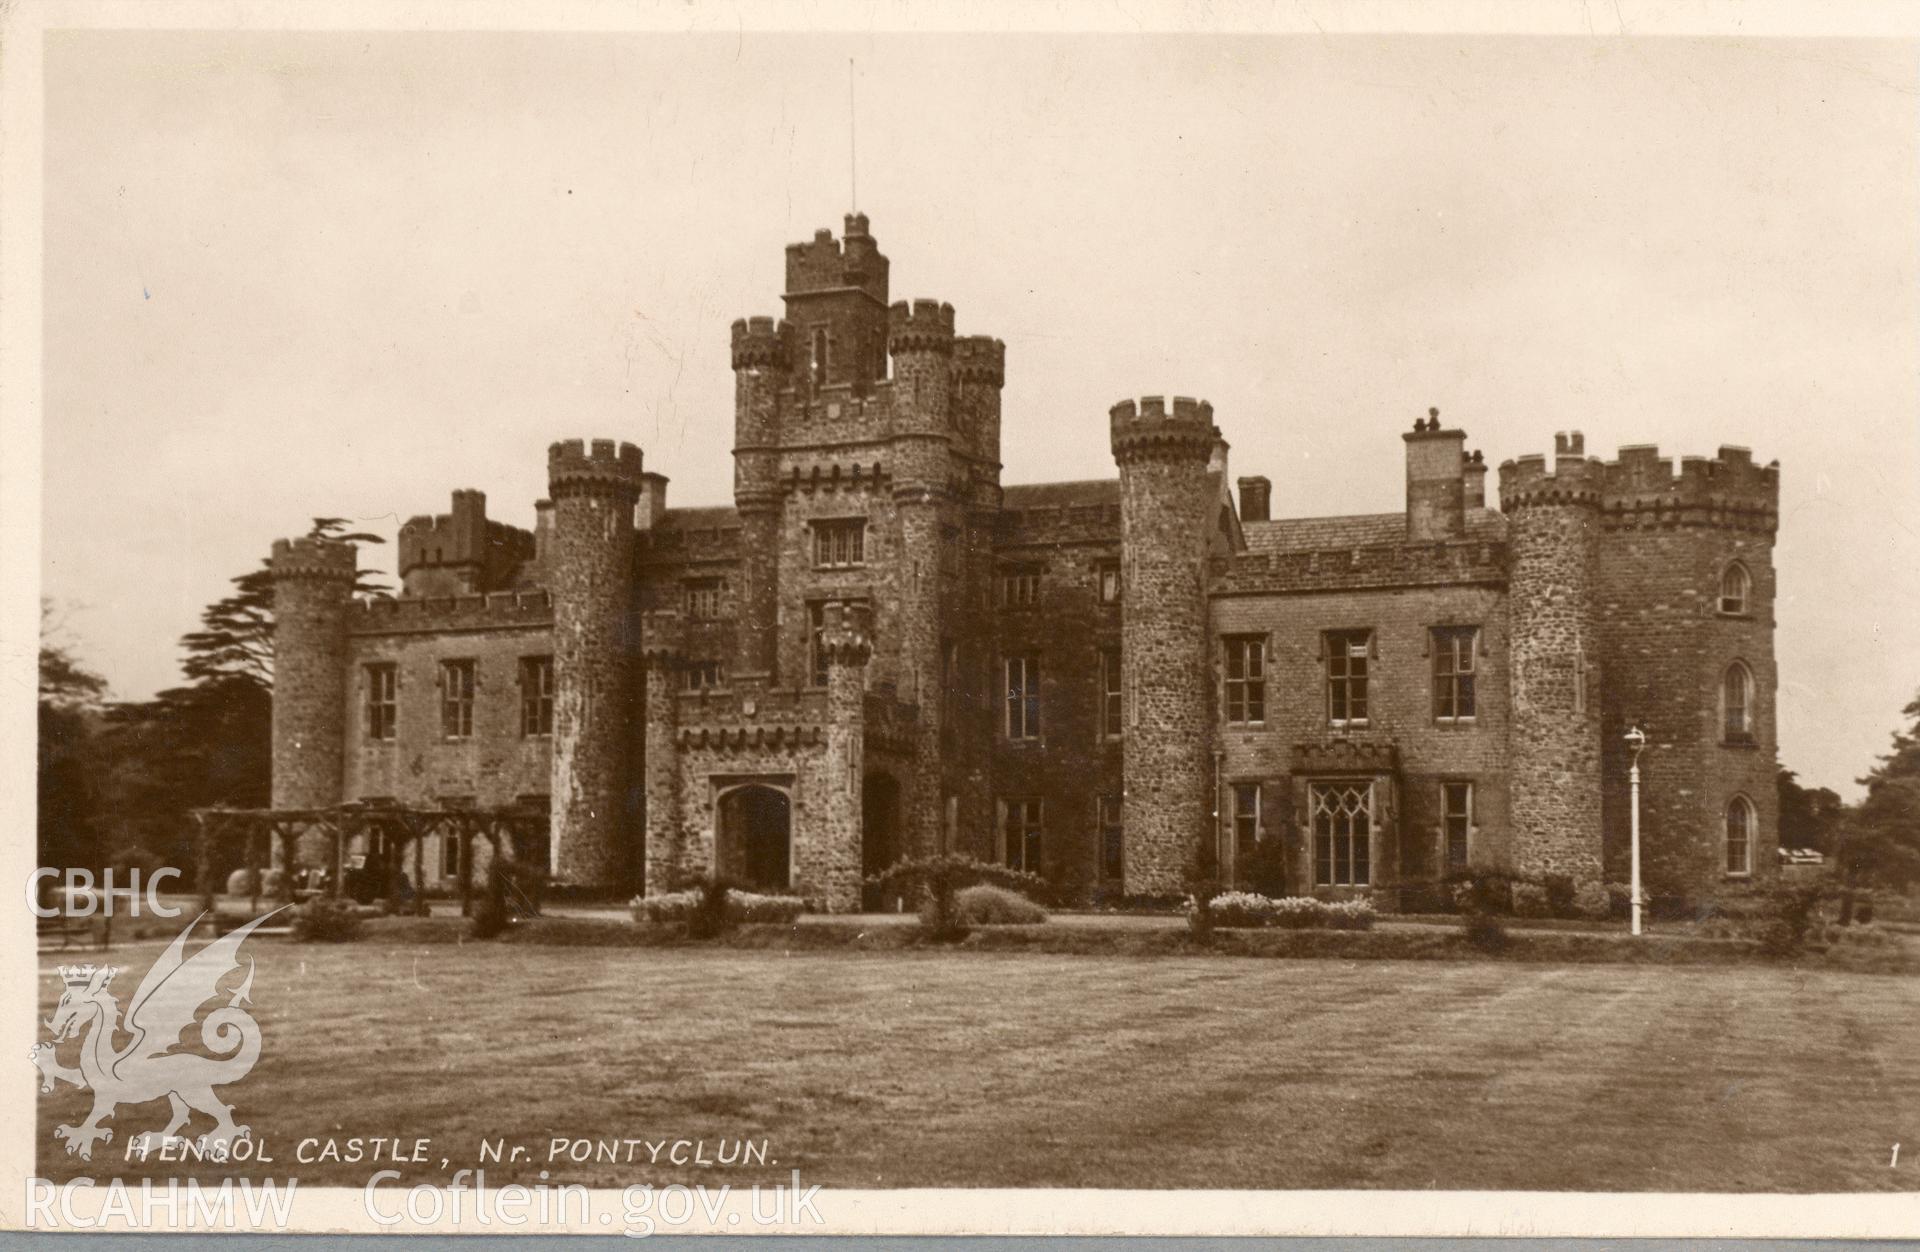 Digitised postcard image of Hensol castle, Pendoylan, The R.A (postcards) Ltd., London. Produced by Parks and Gardens Data Services, from an original item in the Peter Davis Collection at Parks and Gardens UK. We hold only web-resolution images of this collection, suitable for viewing on screen and for research purposes only. We do not hold the original images, or publication quality scans.